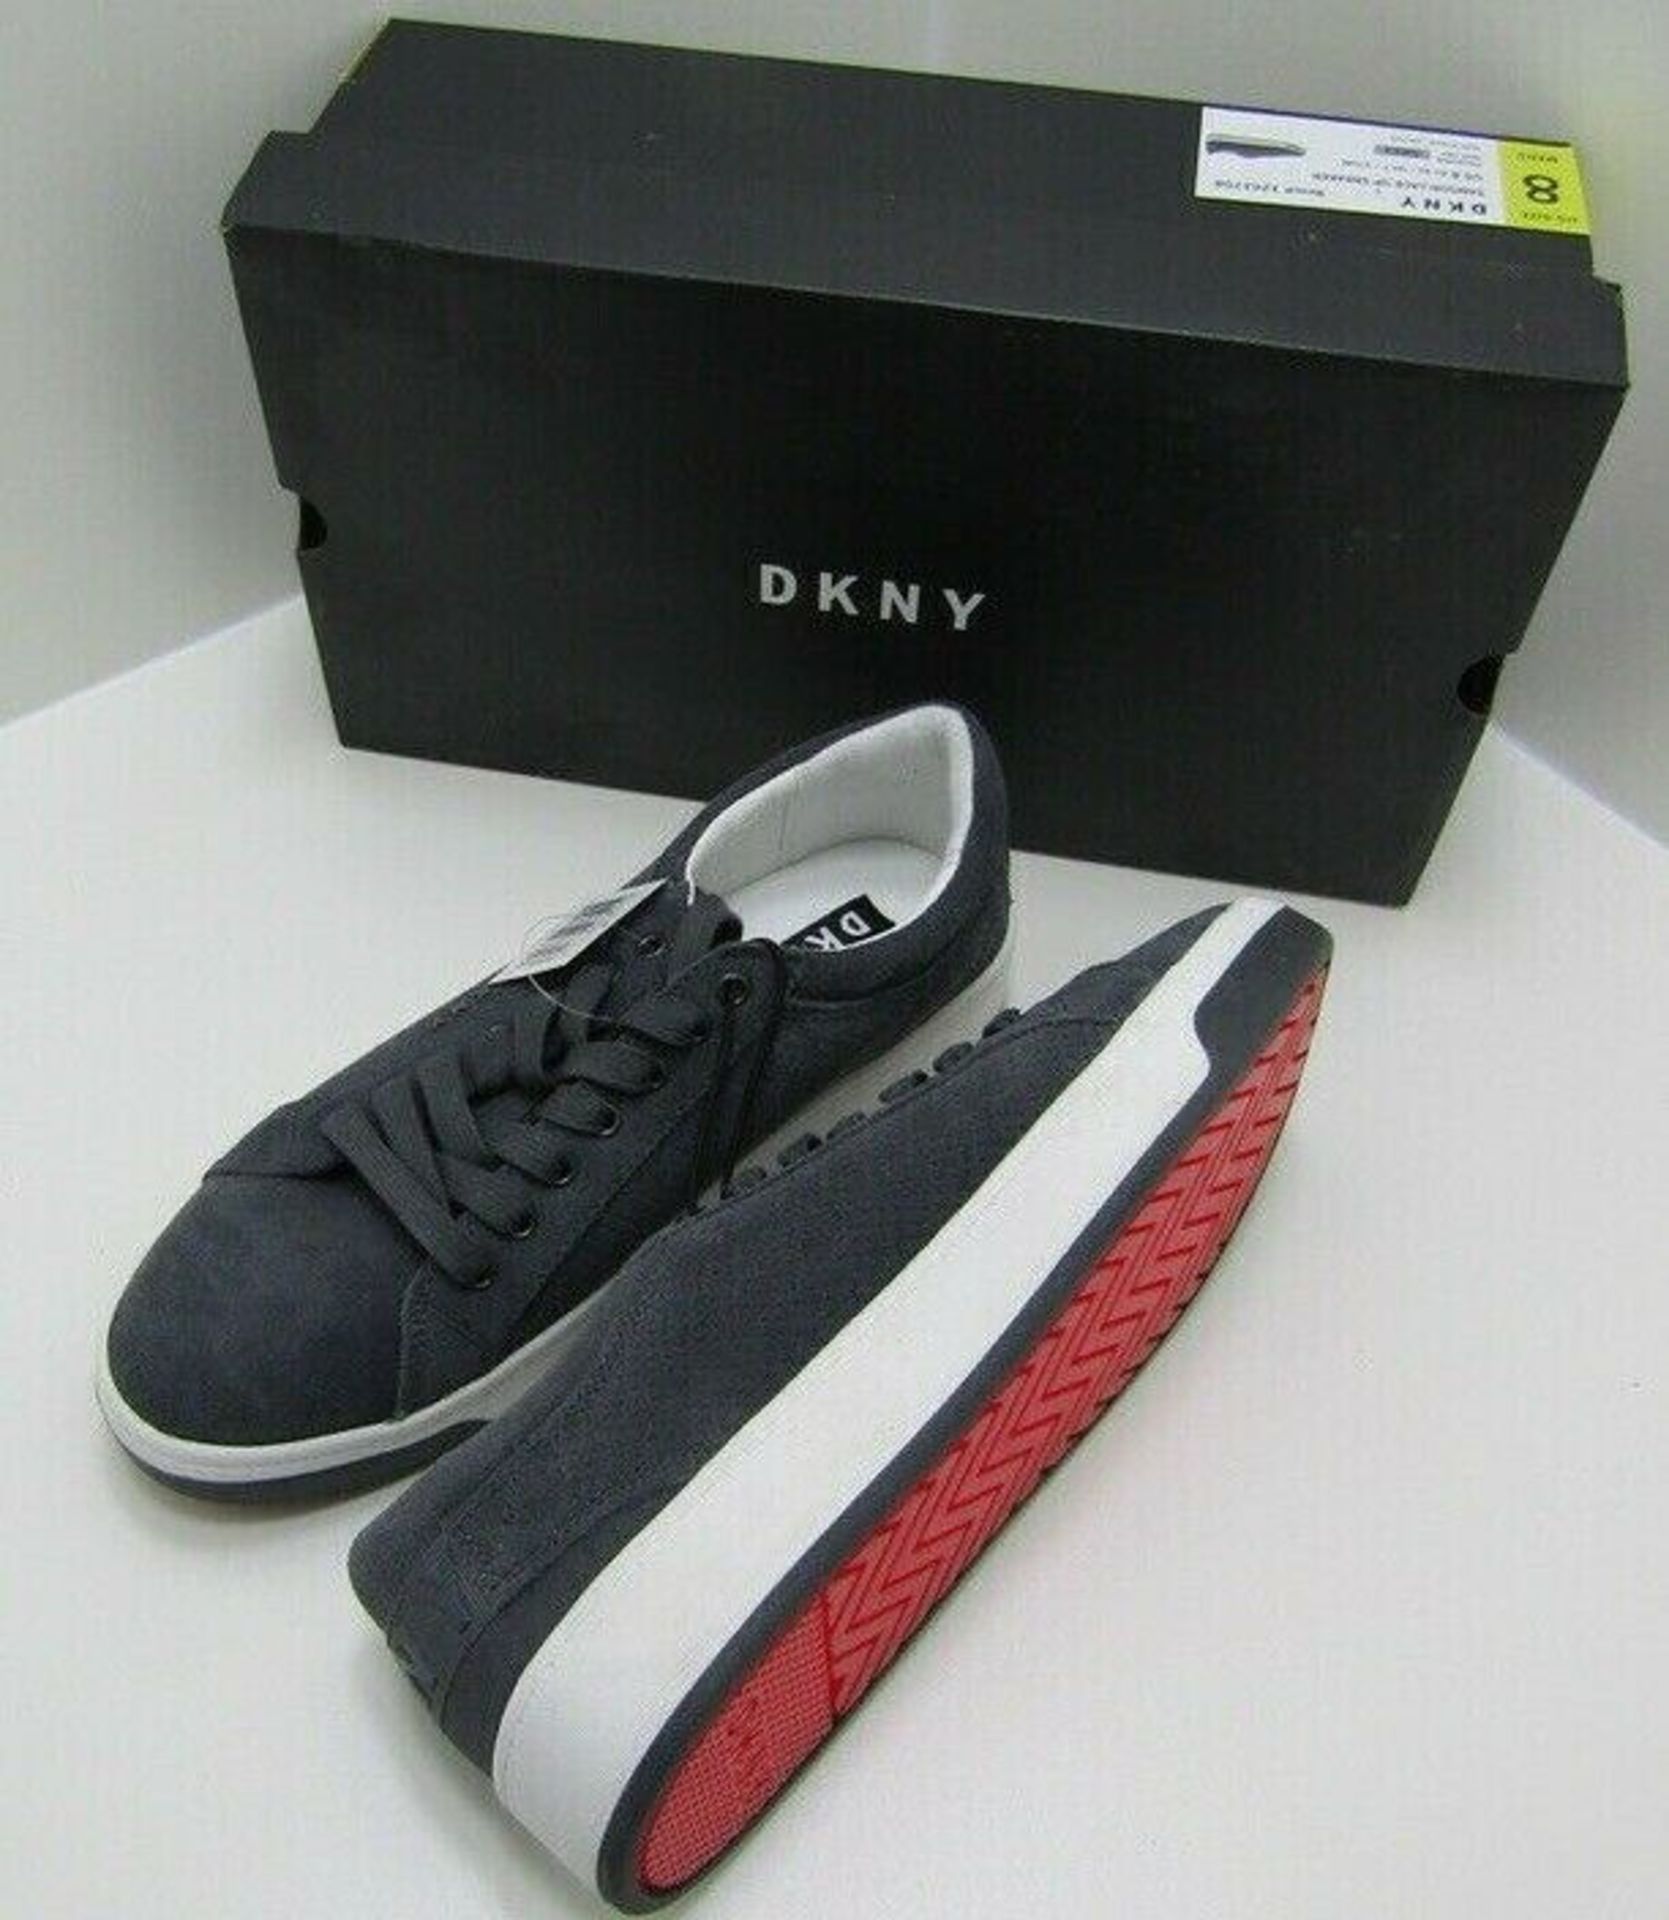 1 Pair of DKNY Samson Deck Shows. Grey. UK Size 7 - Image 2 of 2